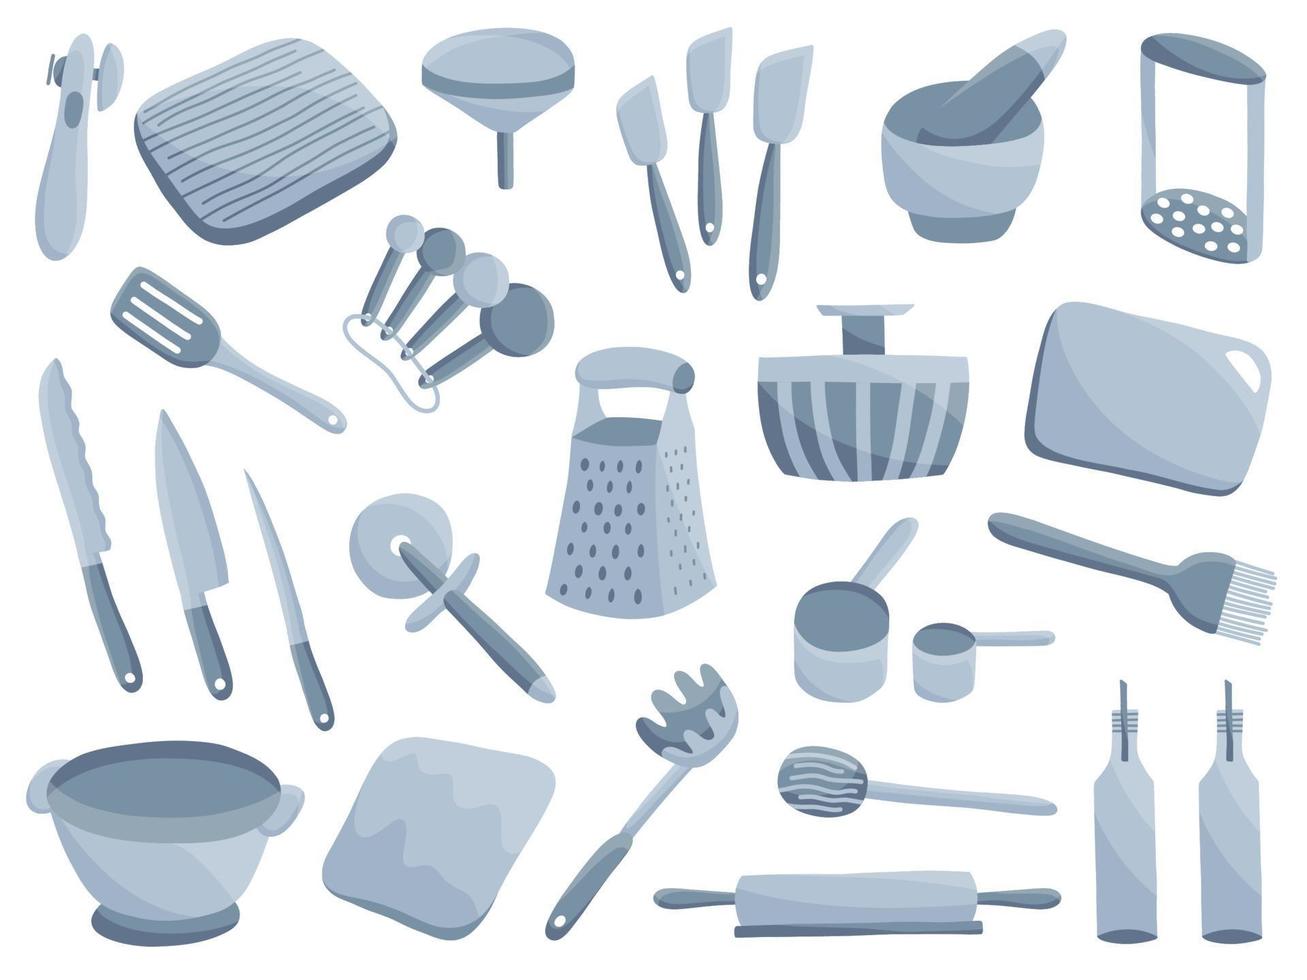 Sets of kitchen tools spade, knife, spatula, cutting board, masher, funnel, grater, rolling pin, spoons, cups. Kitchenware collection. vector